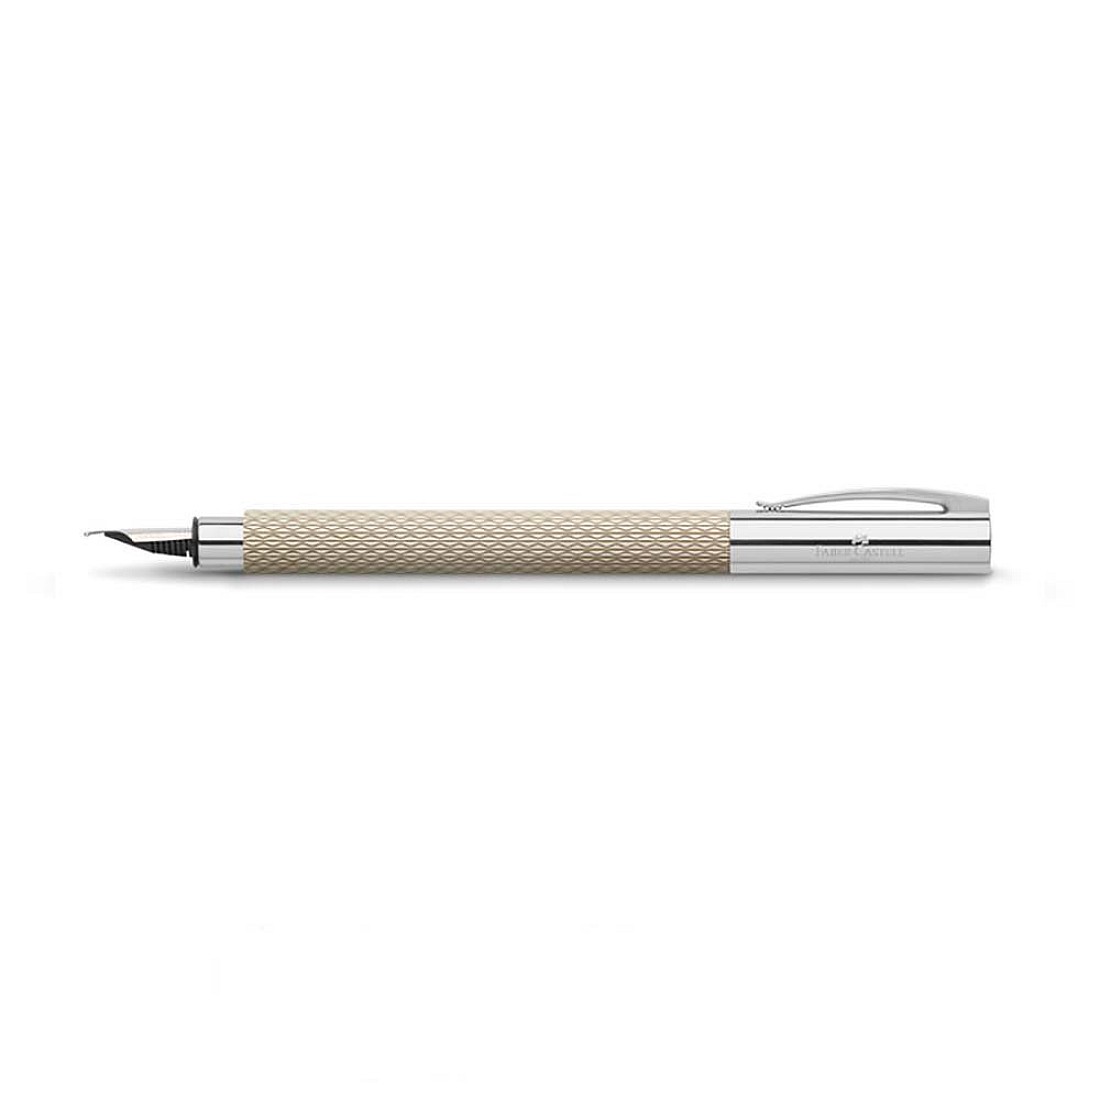 Faber-Castell Ambition OpArt White Sand Fountain pen